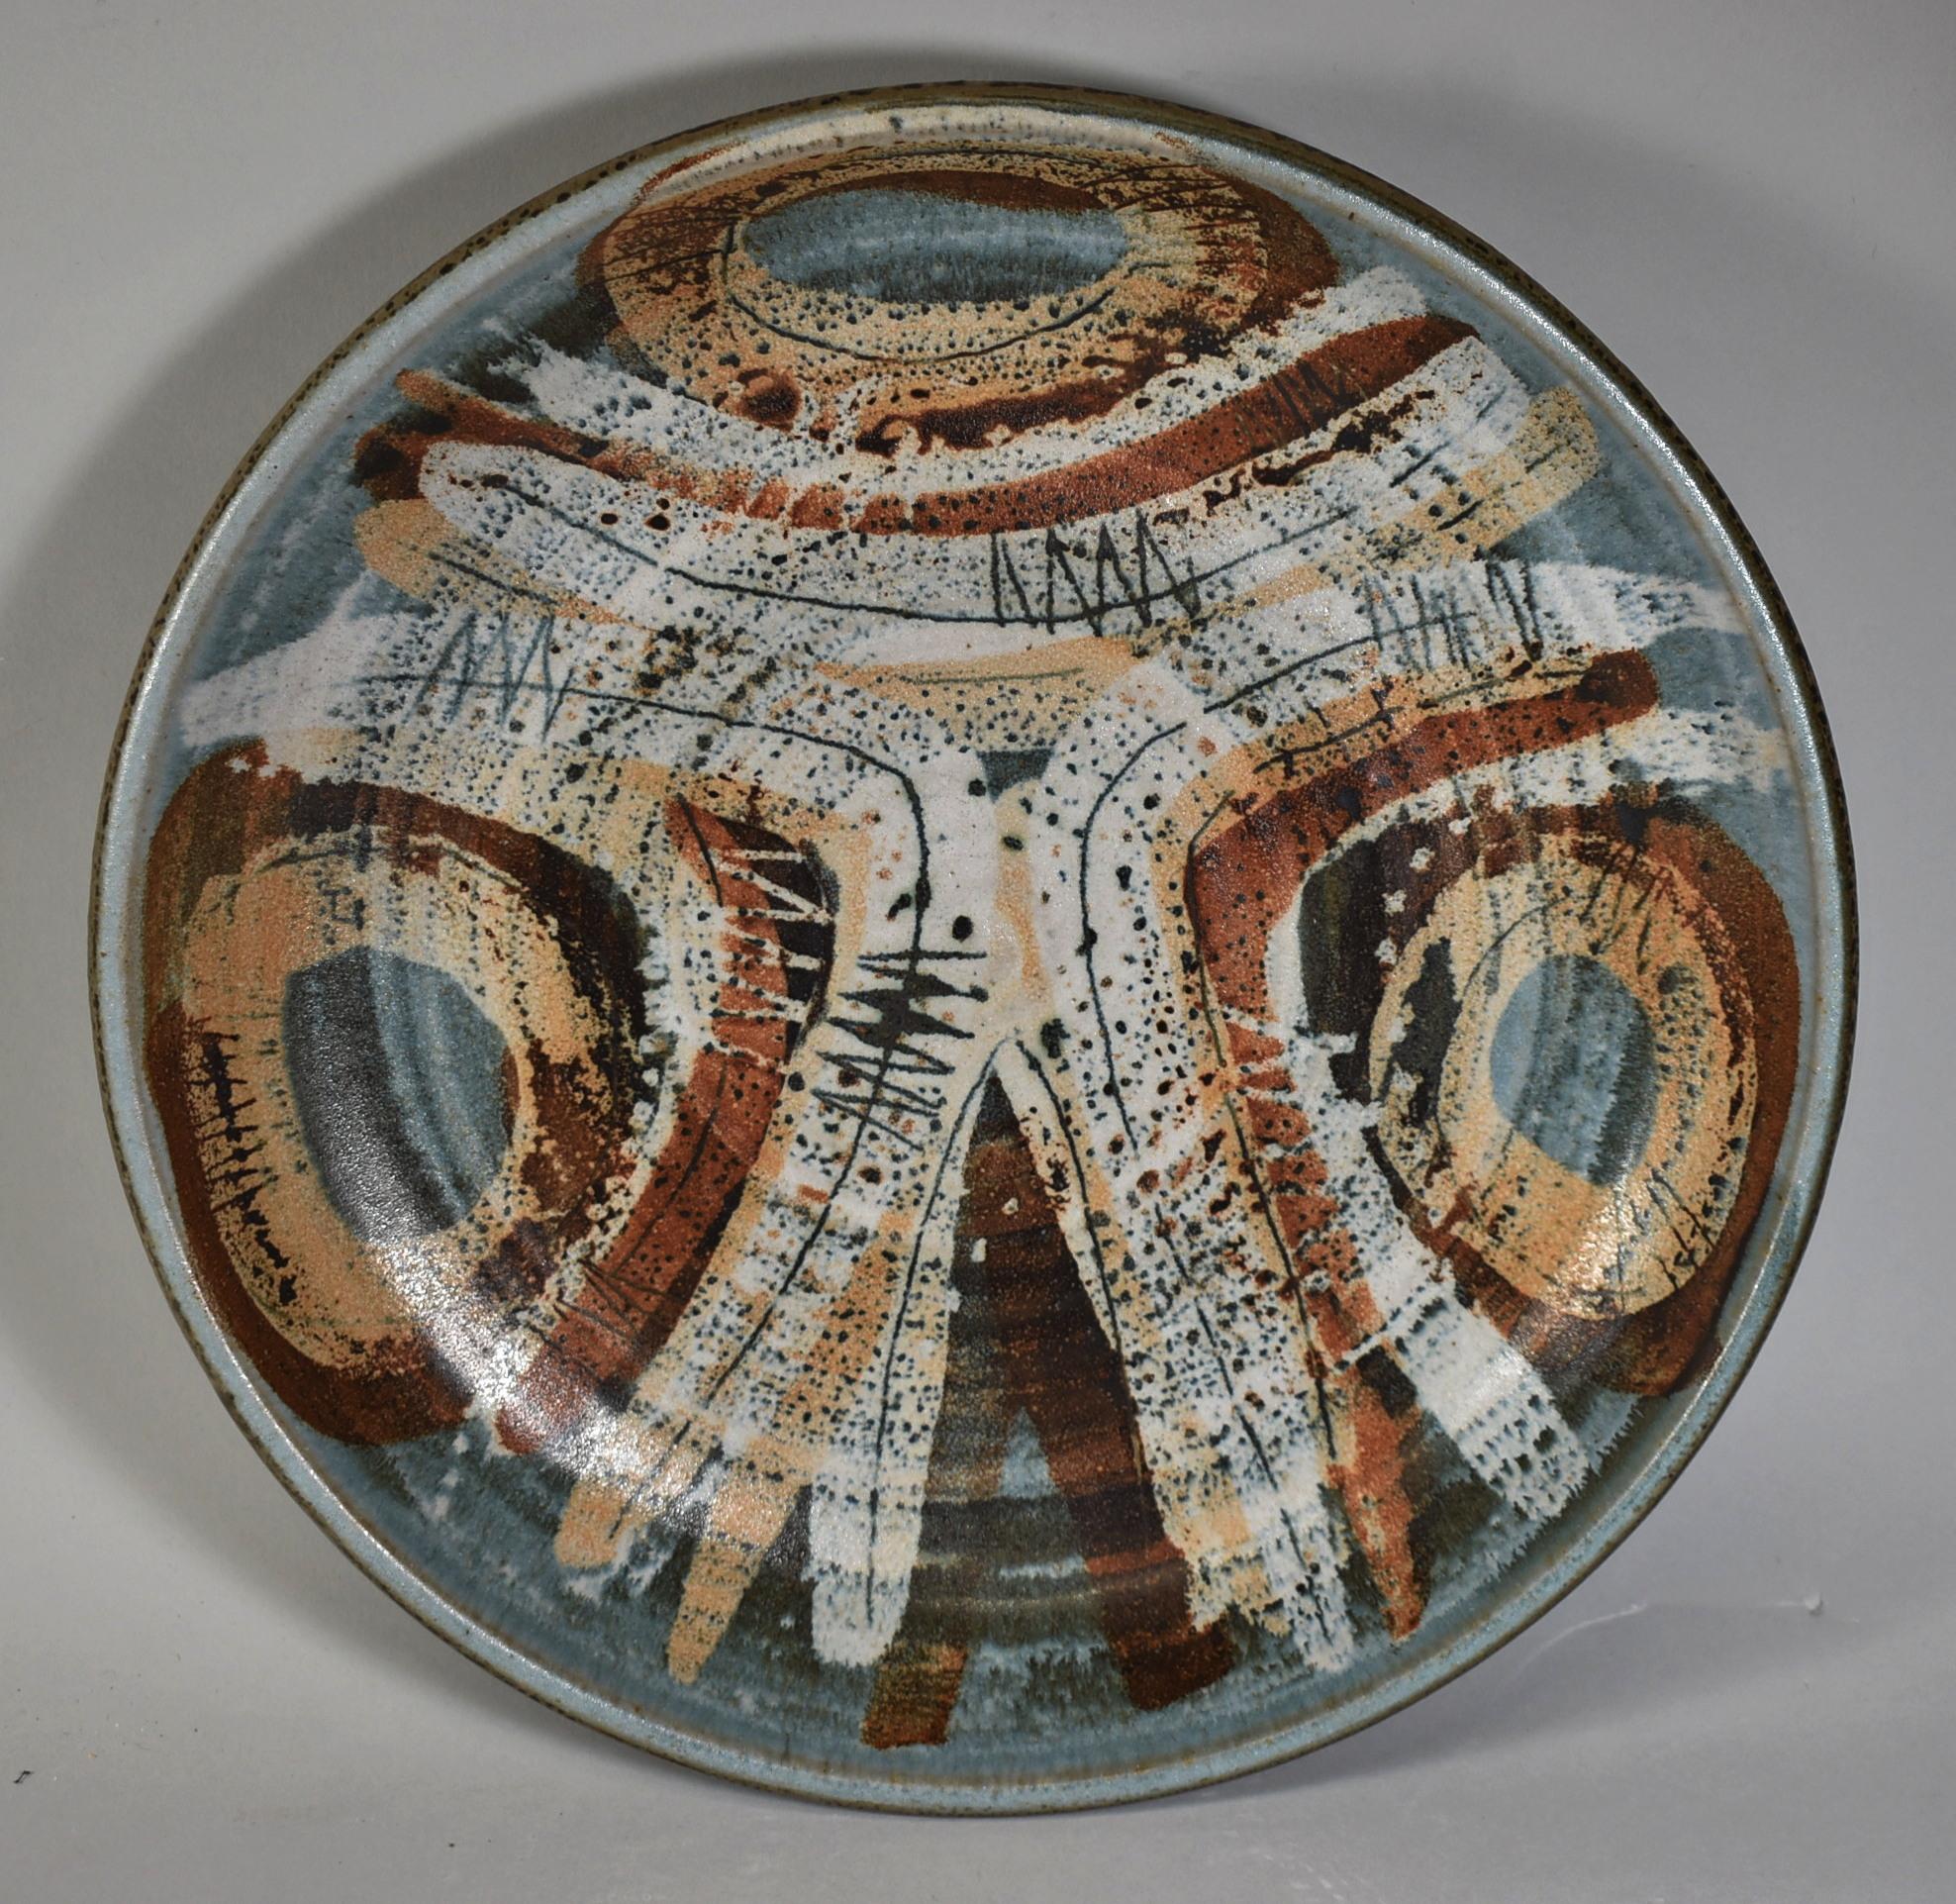 North American Vintage Clyde Burt Ceramic Pottery Bowl 14.75 Circa 1960's Blue Rust Earth Tones For Sale